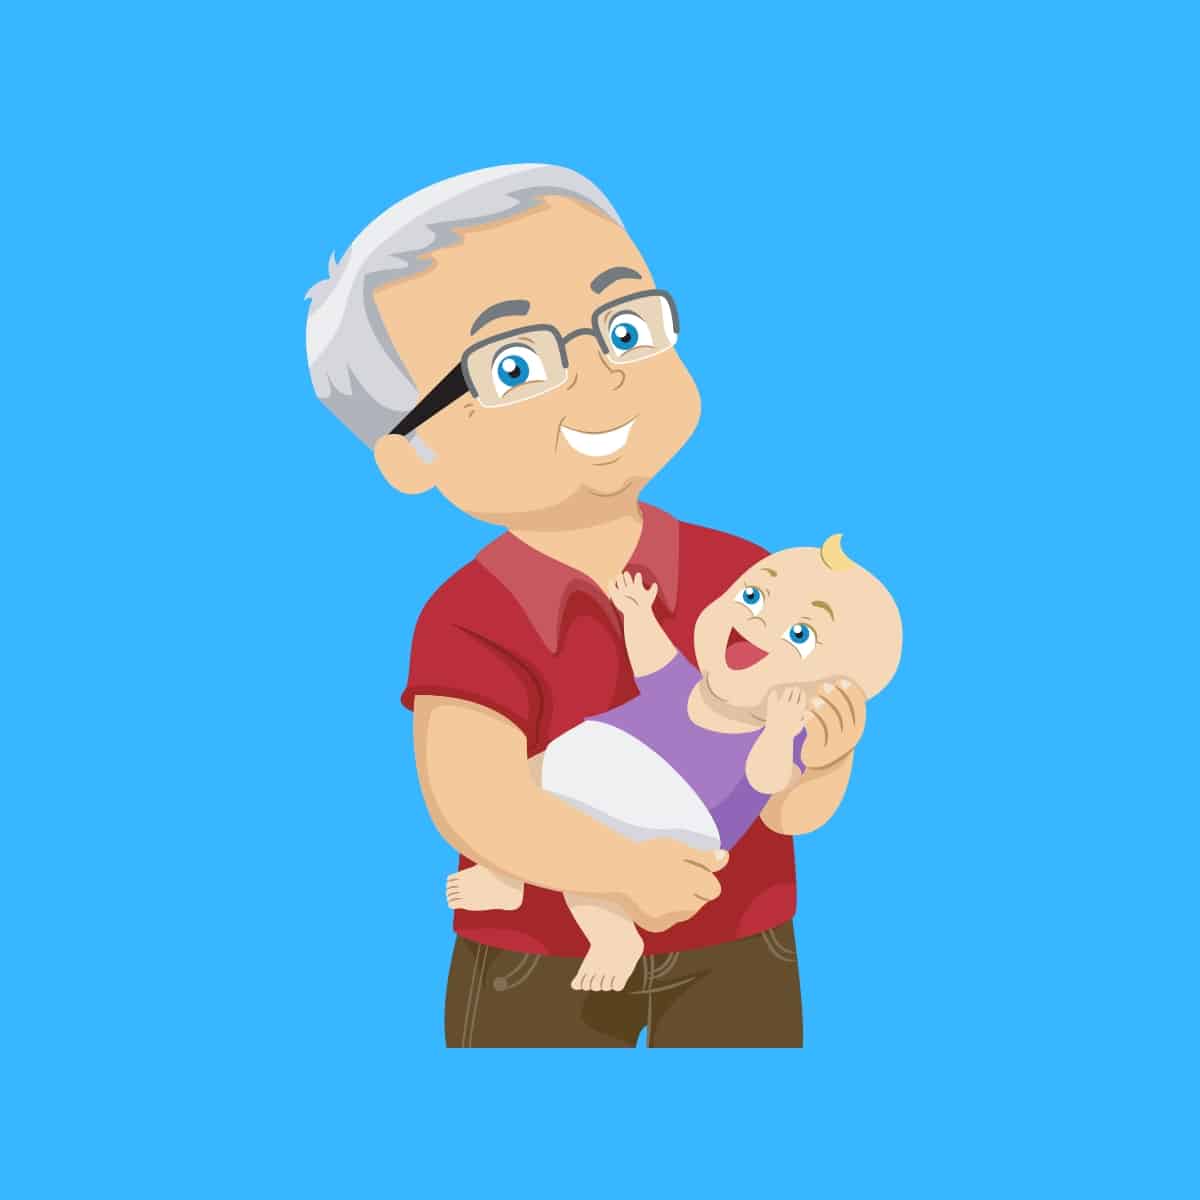 Cartoon graphic of a grandpa holding his grandchild on a blue background.